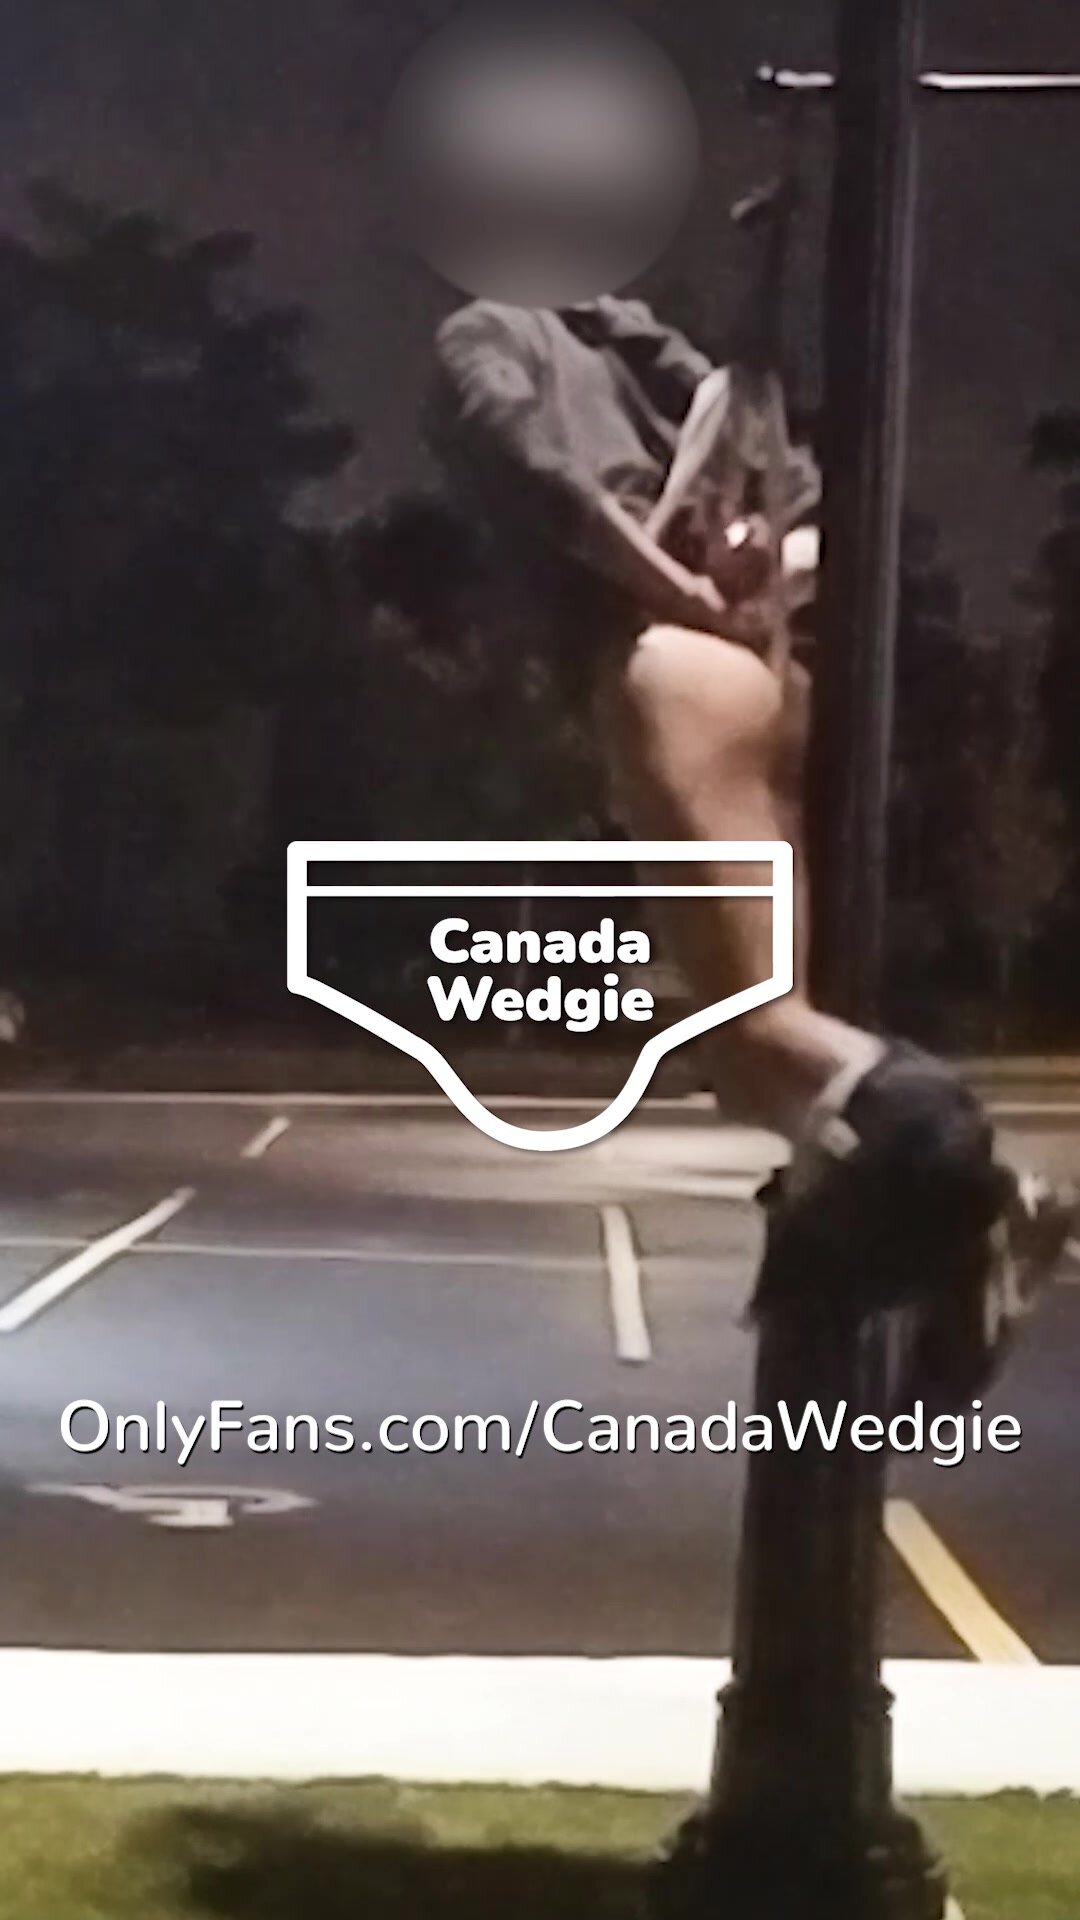 Lamppost Wedgie 01 (2 Angles)